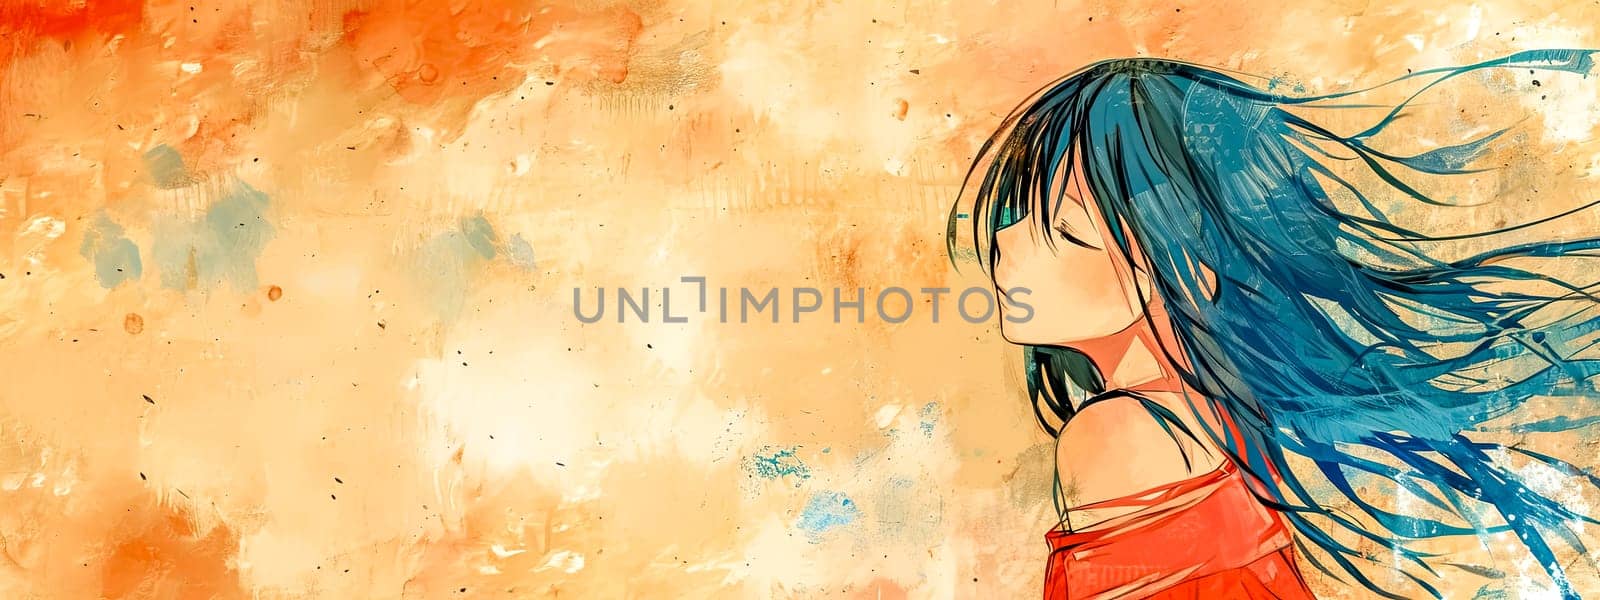 anime girl with flowing blue hair against an abstract orange textured background, invoking a sense of serenity and creativity. copy space